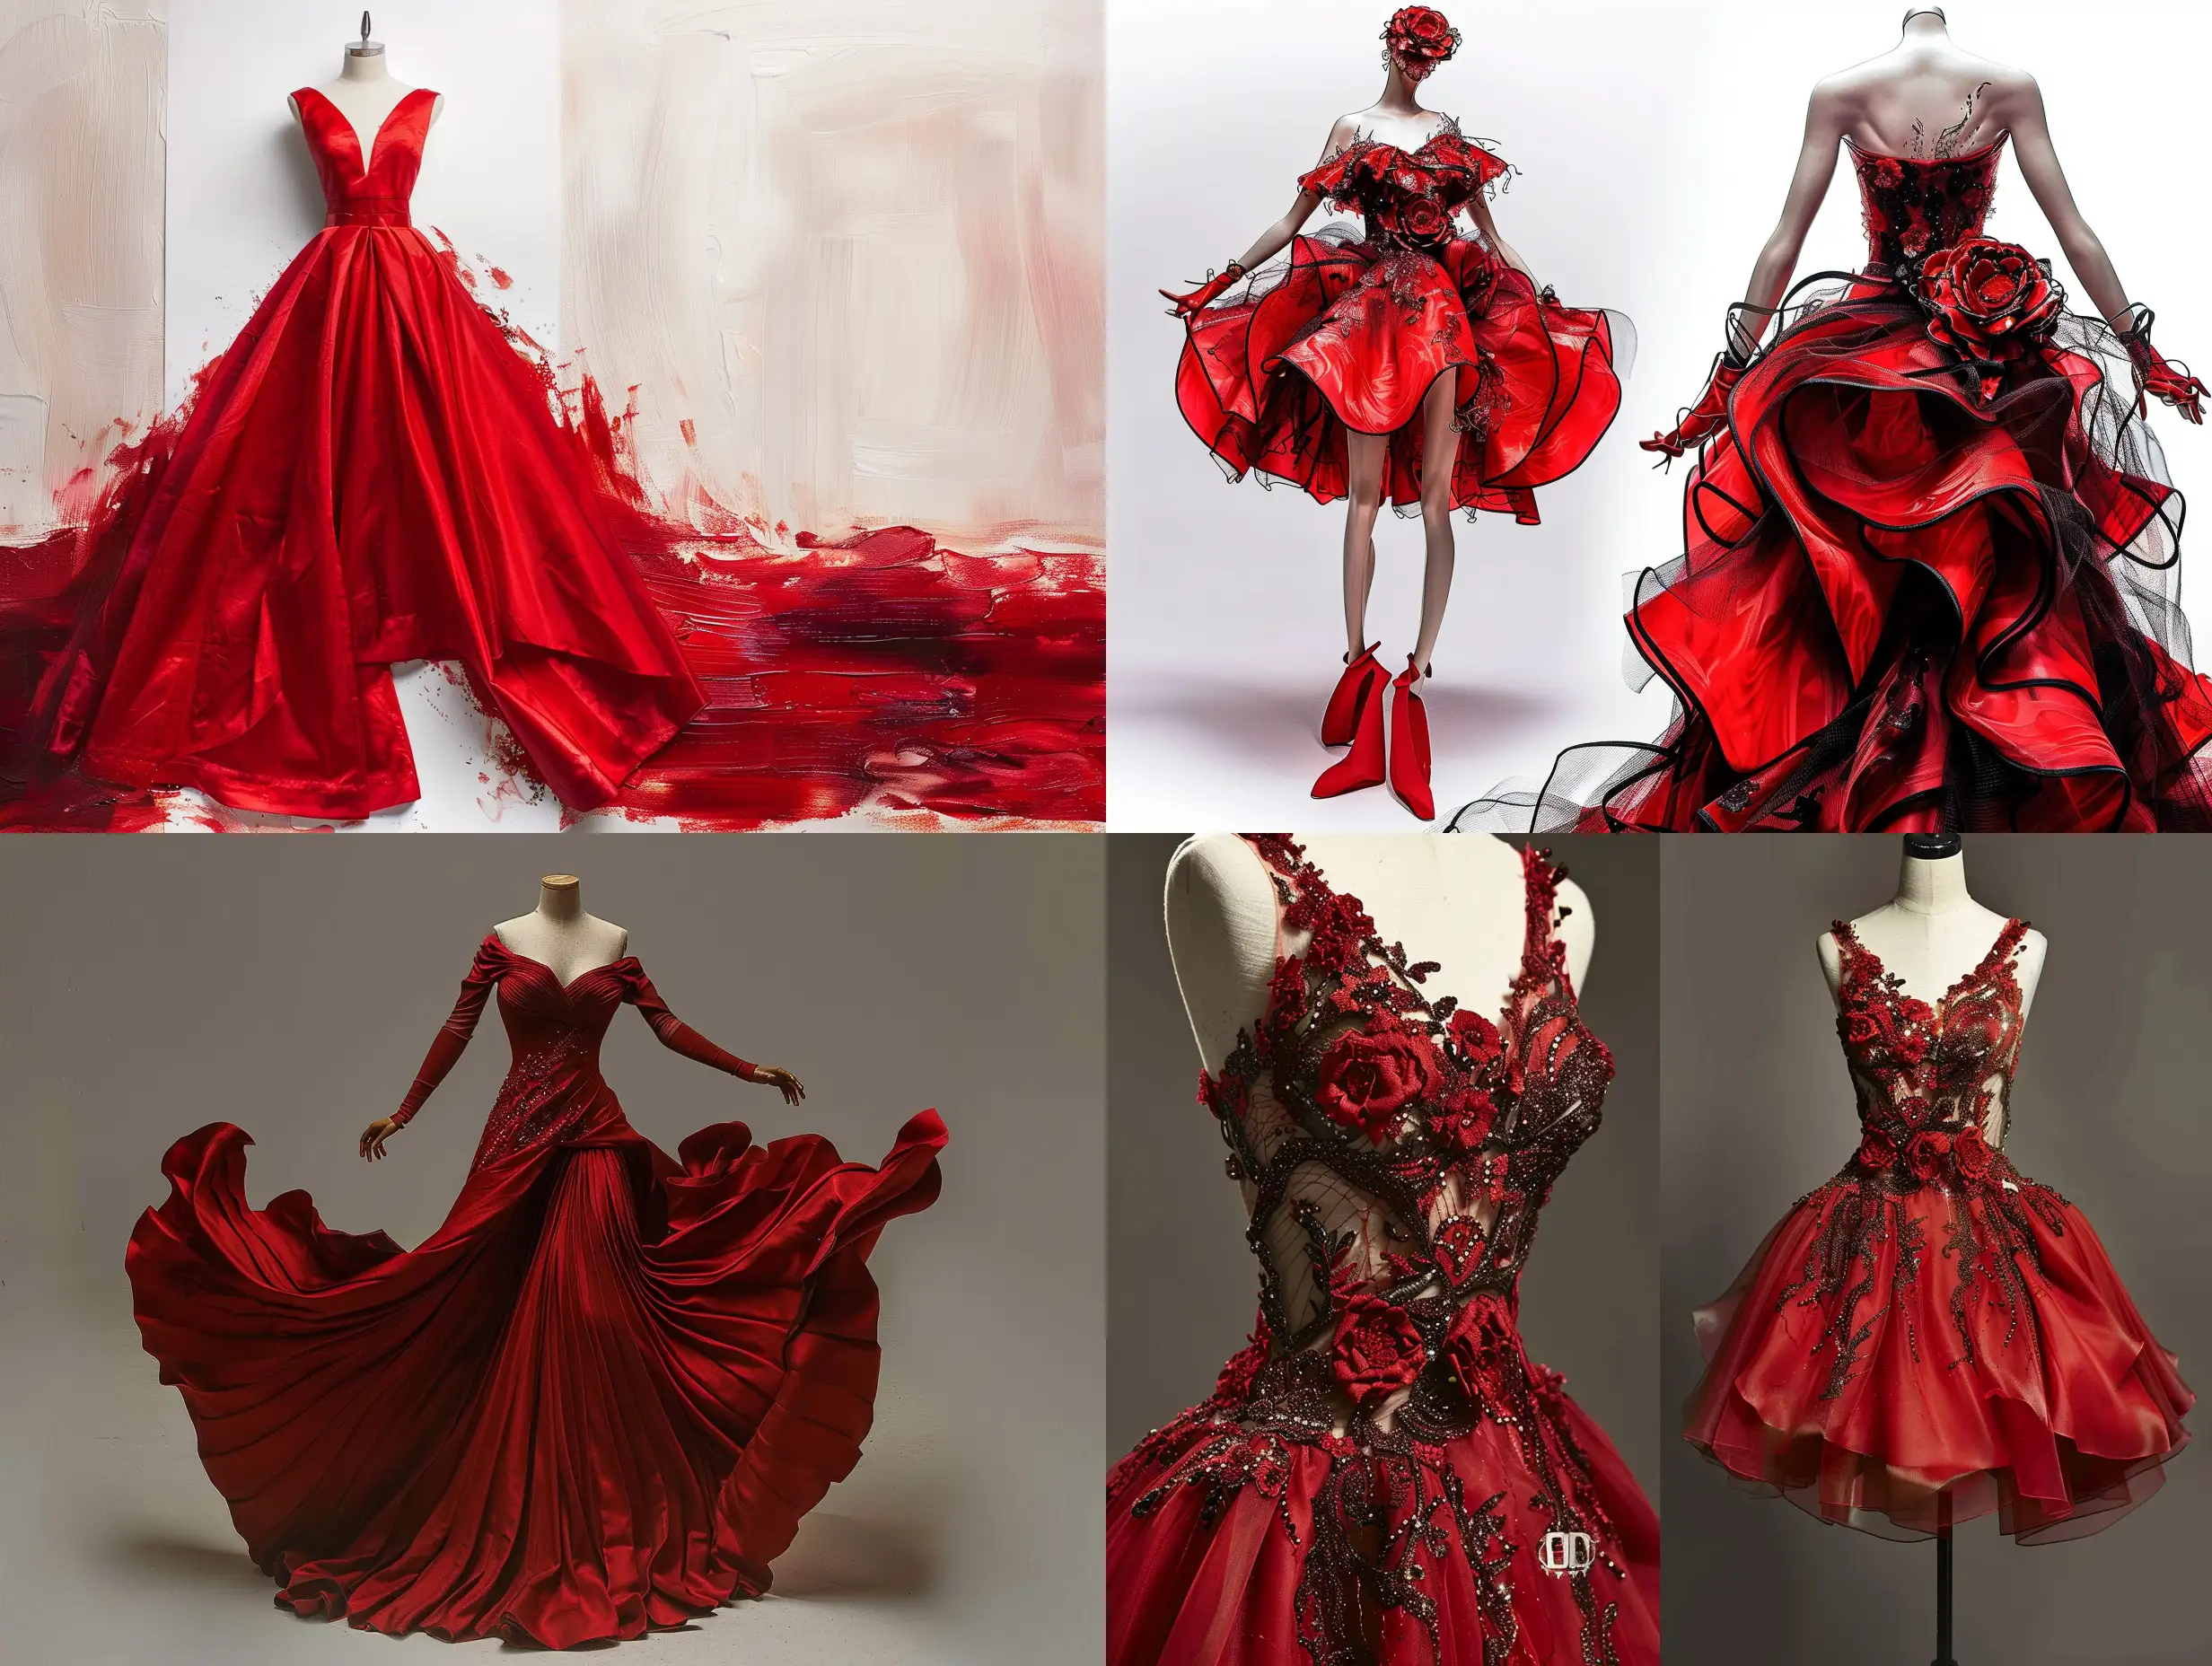 Stylish-Red-Fashion-Dresses-Vibrant-Designs-for-Elegance-and-Glamour